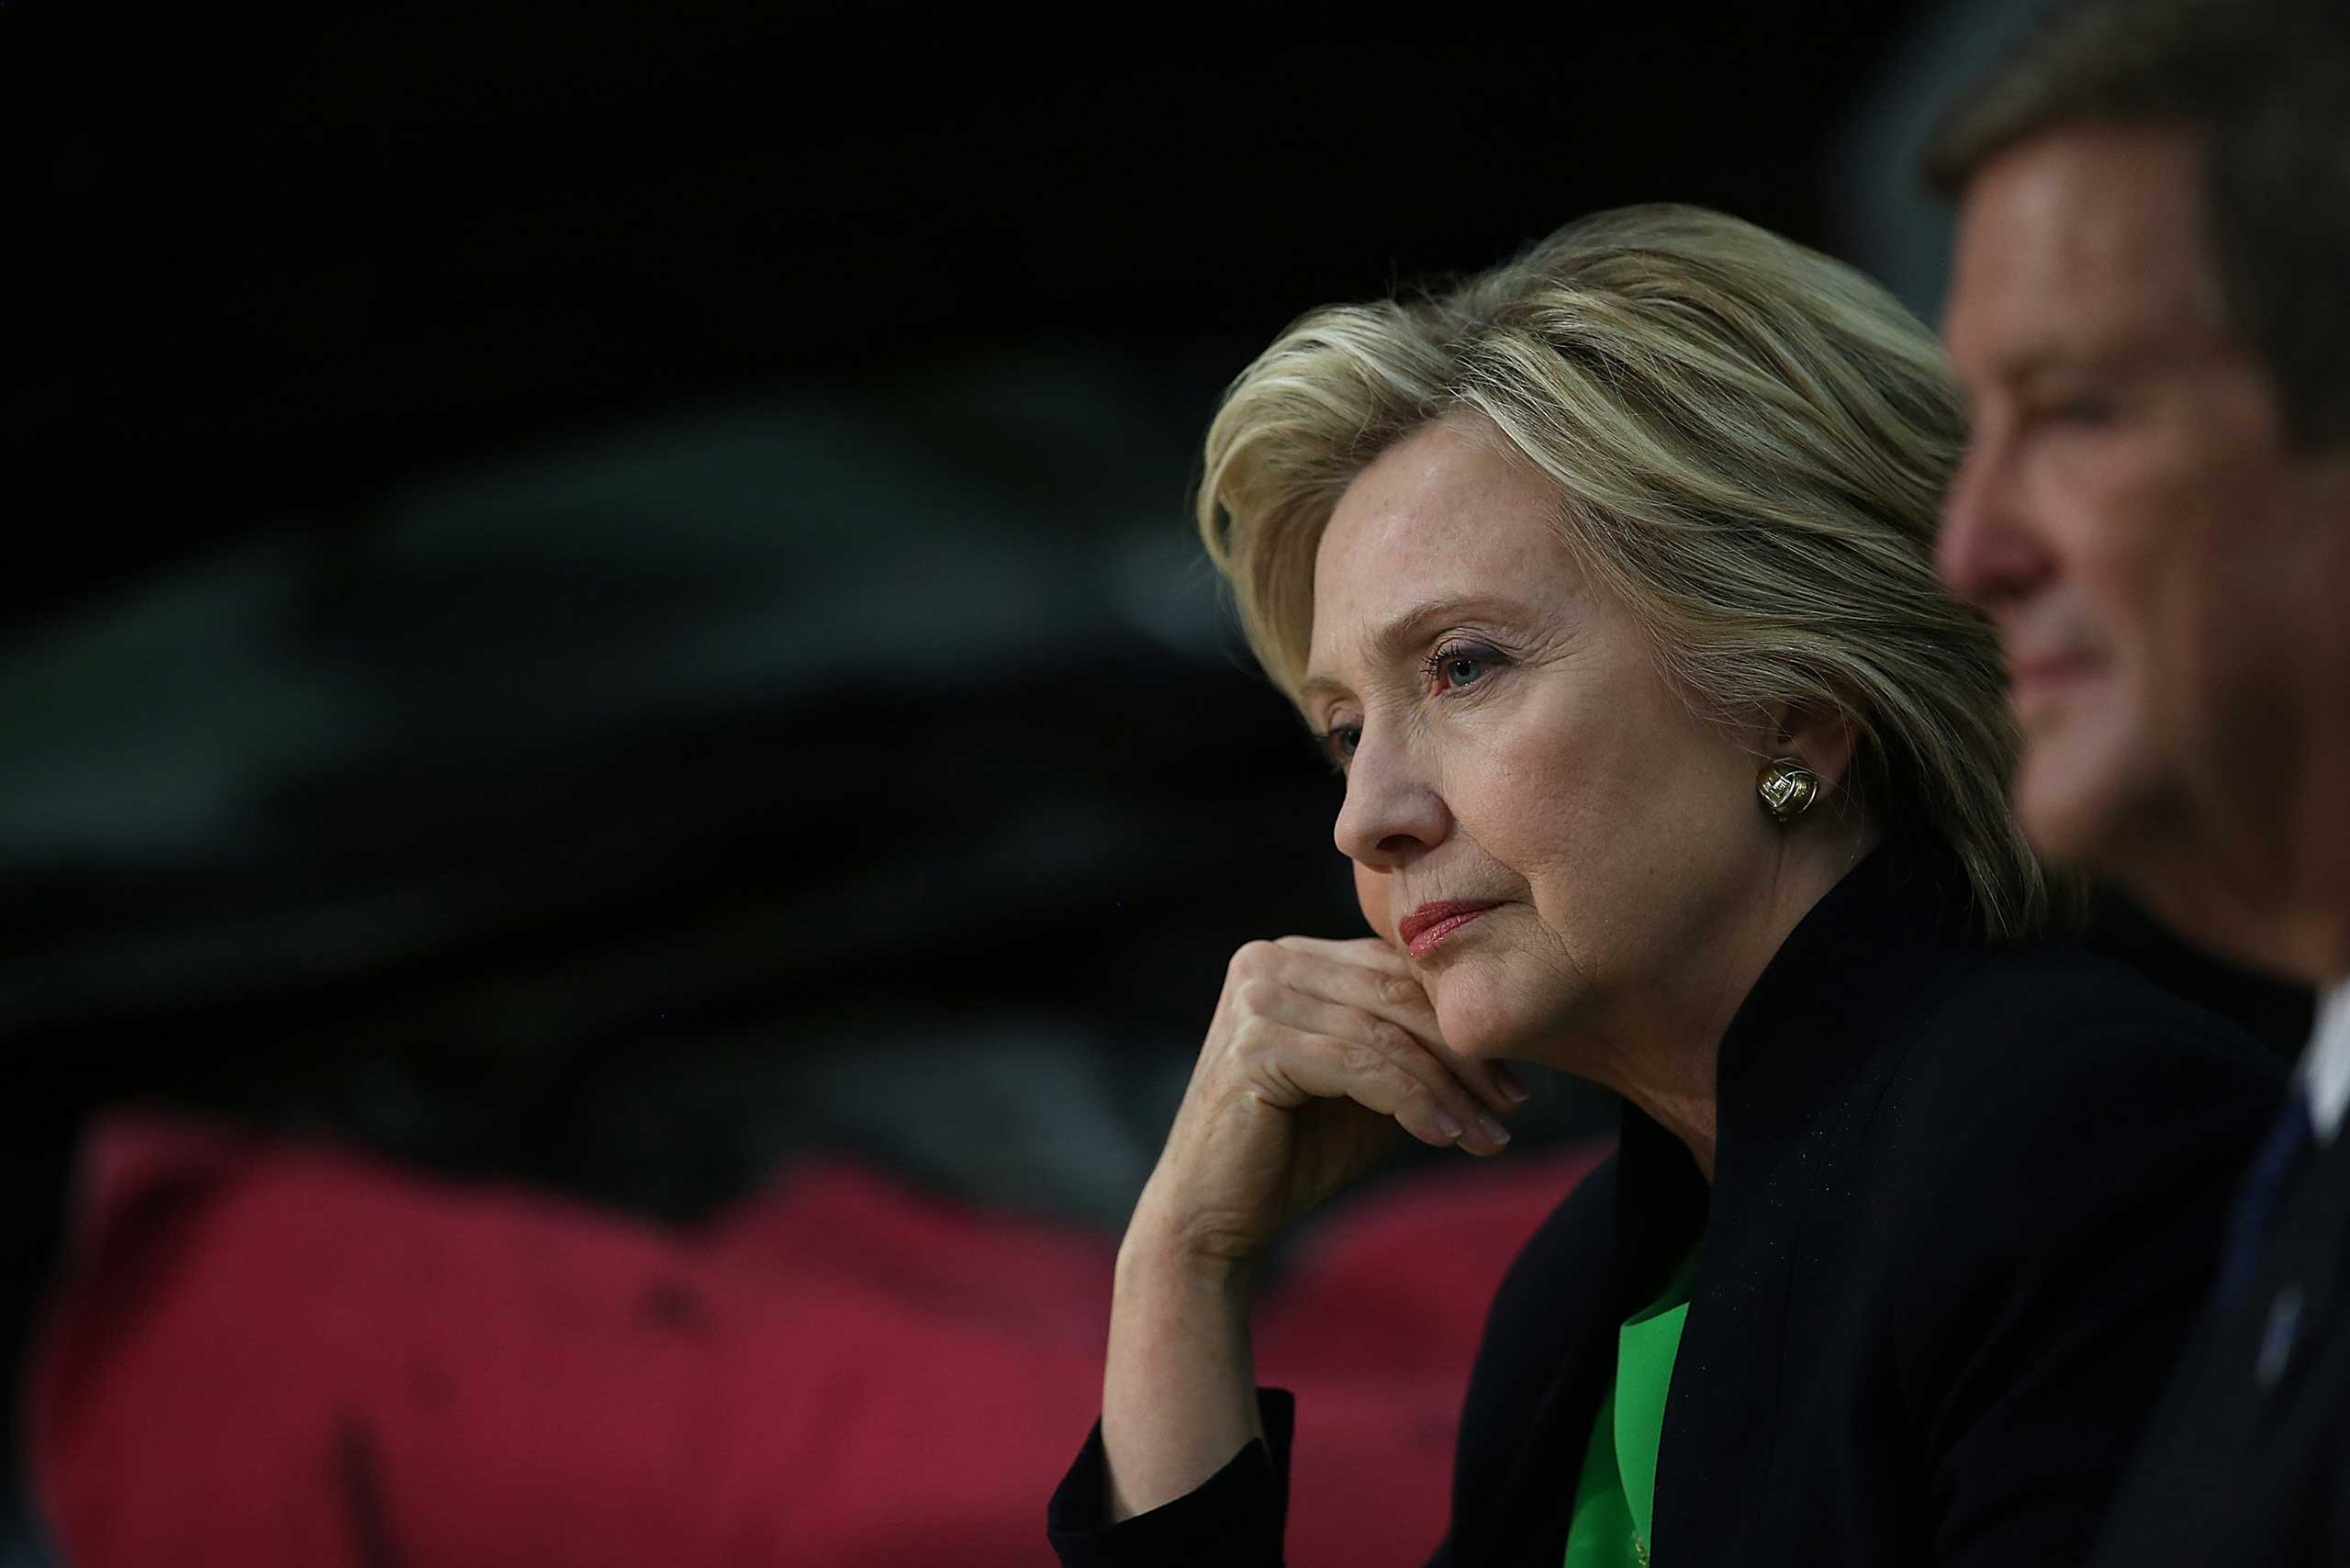 Democratic presidential hopeful and former Secretary of State Hillary Clinton looks on during a roundtable discussion with students and educators at the Kirkwood Community College Jones County Regional Center in Monticello, Iowa, on Apr. 14, 2015. (Justin Sullivan—Getty Images)